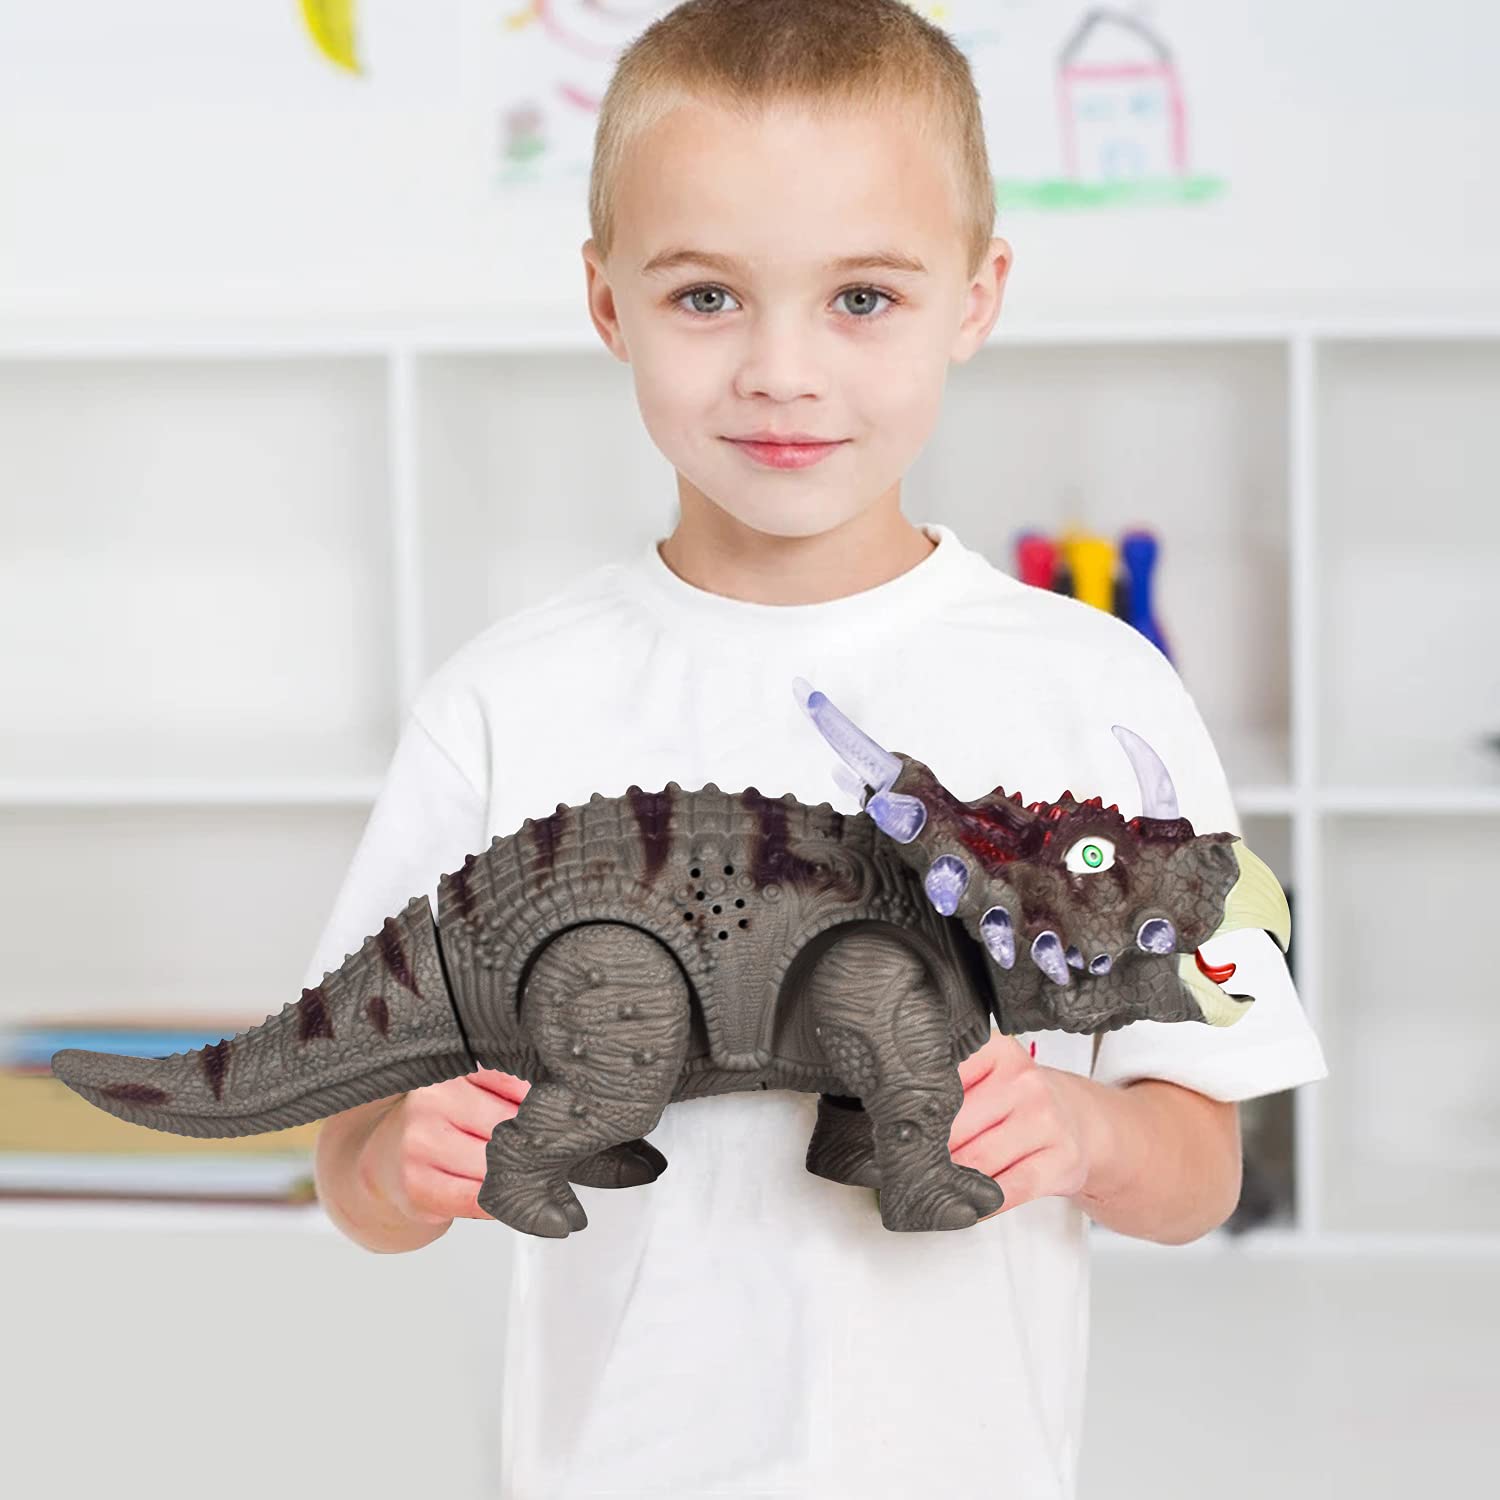 Walking Electronic Triceratops Dinosaur Toys, Realistic Walking Robot Dino Toys with Roaring Sound and LED Light Up for 3-5+ Years Old Kids, Boys and Girls Birthday Gift